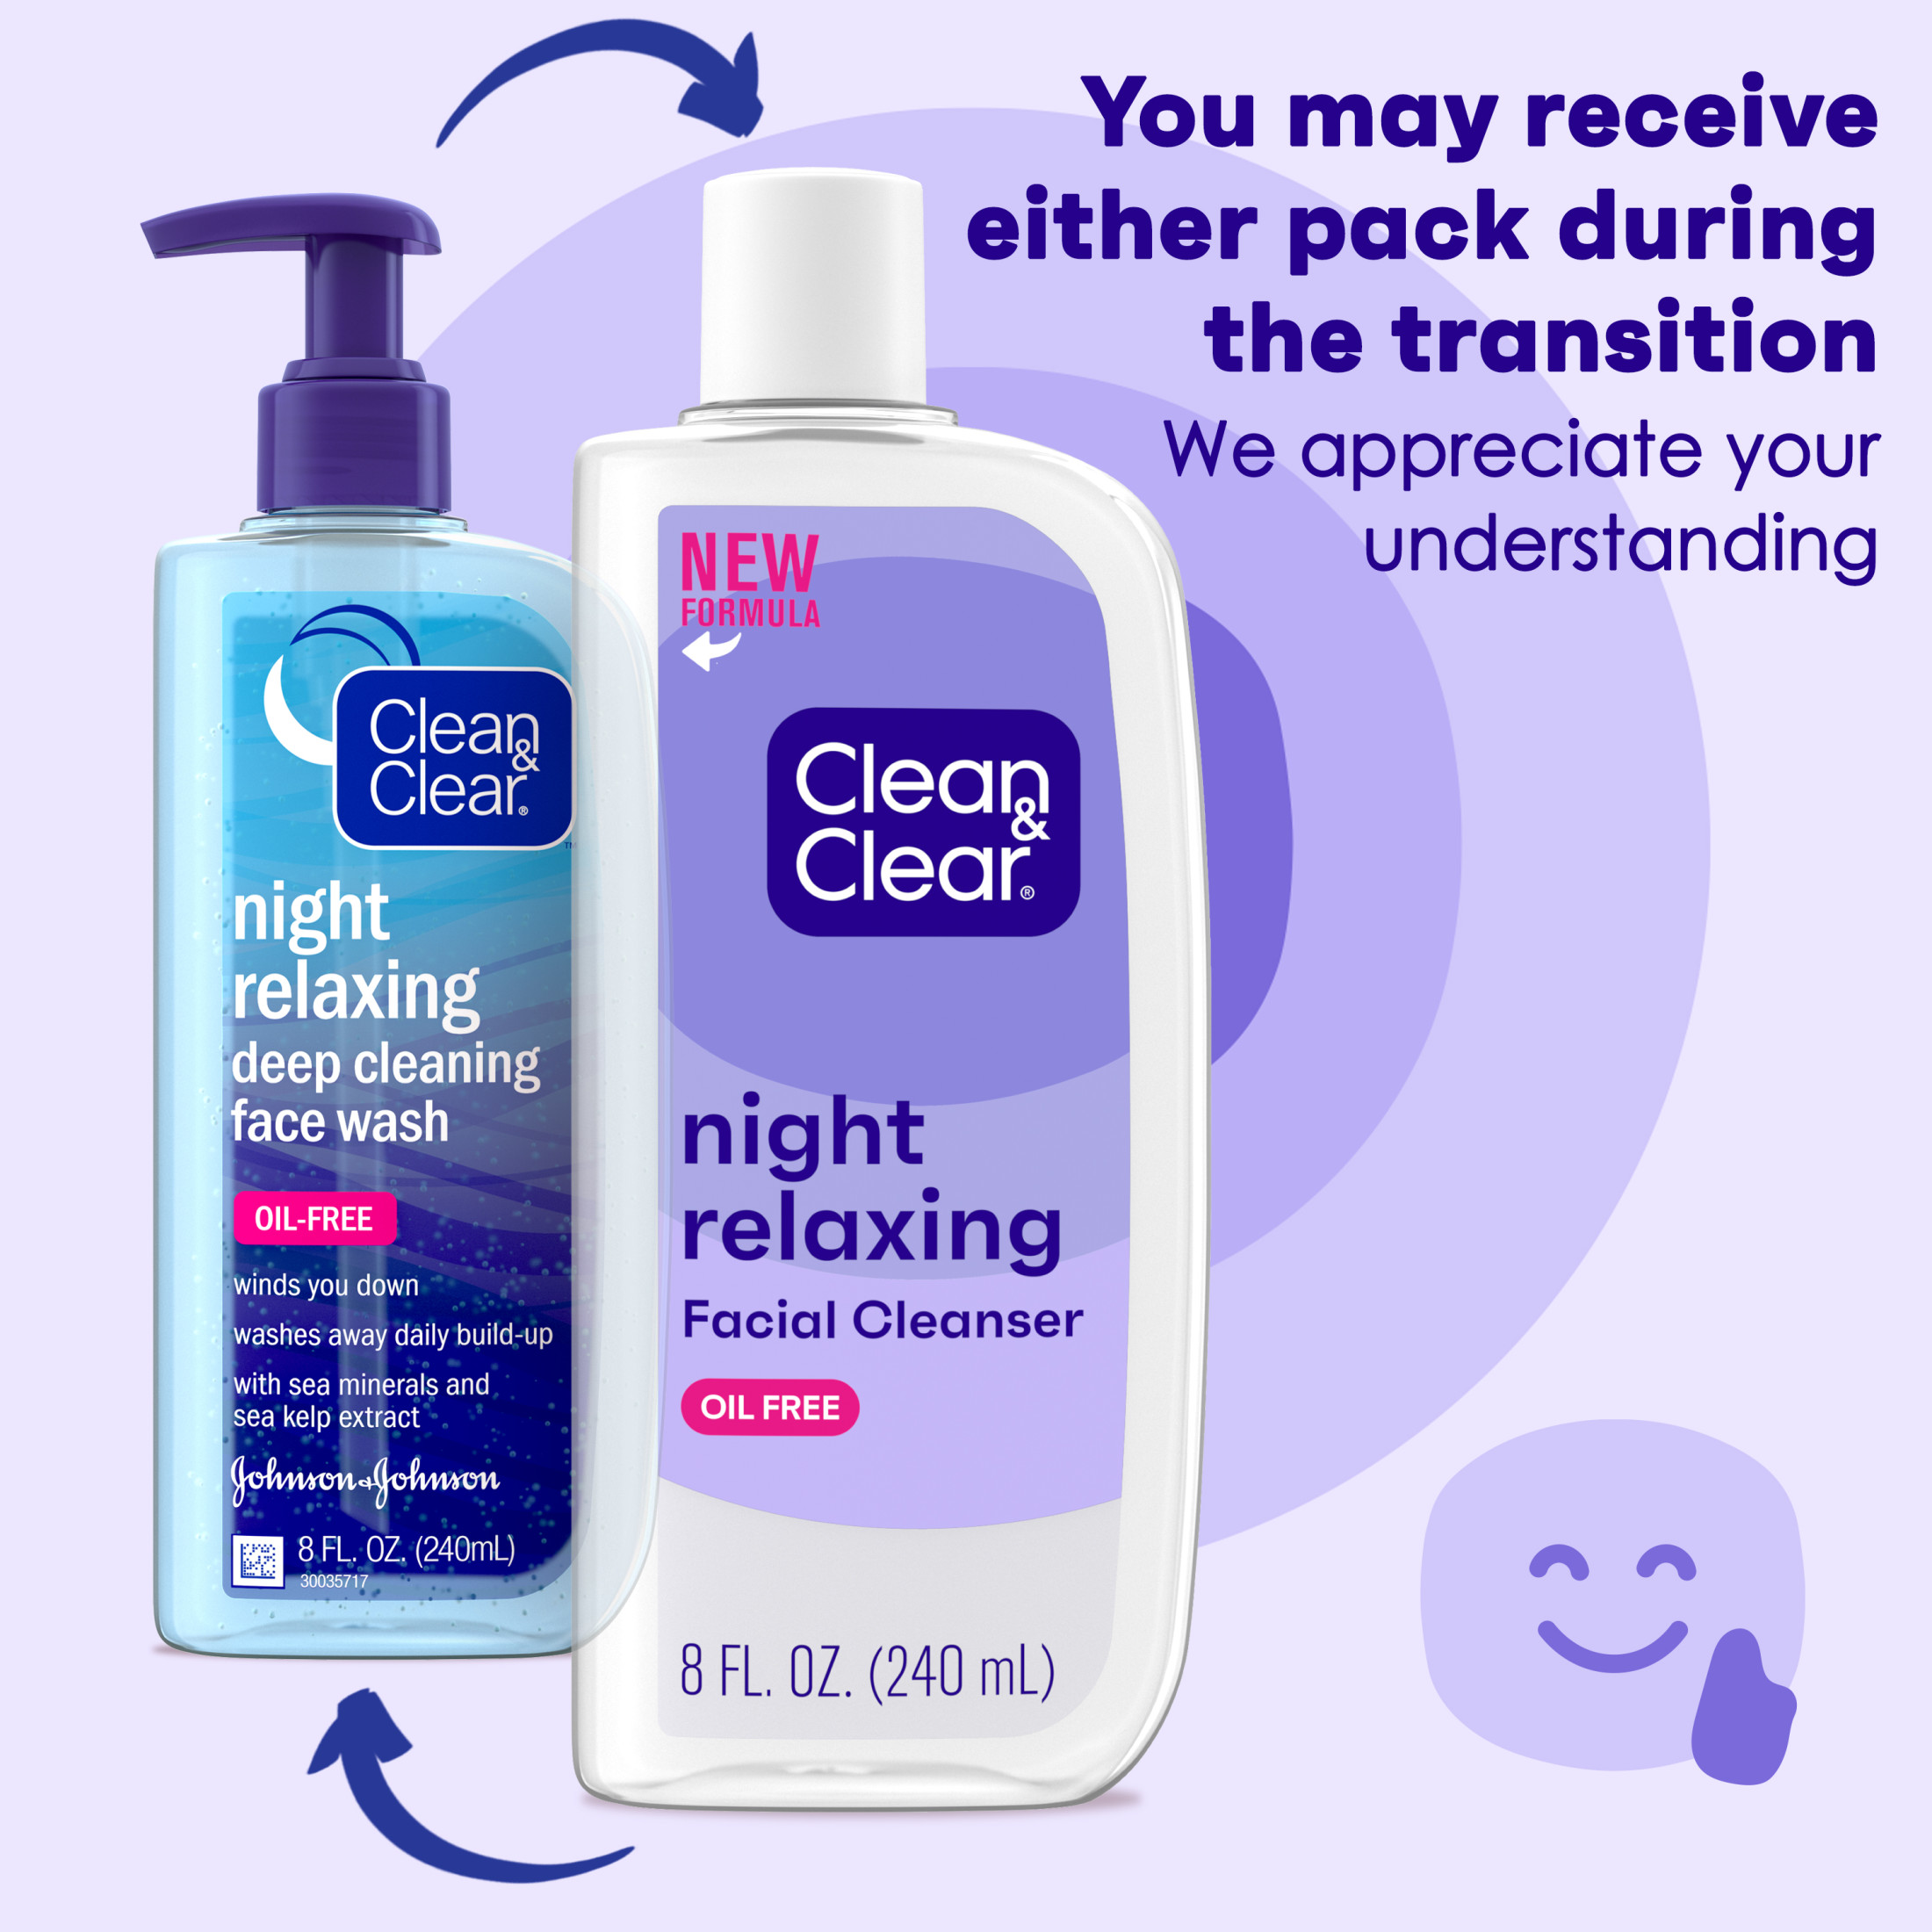 Clean & Clear Night Relaxing Oil-Free Night Face Wash, 8 fl. oz - image 2 of 9